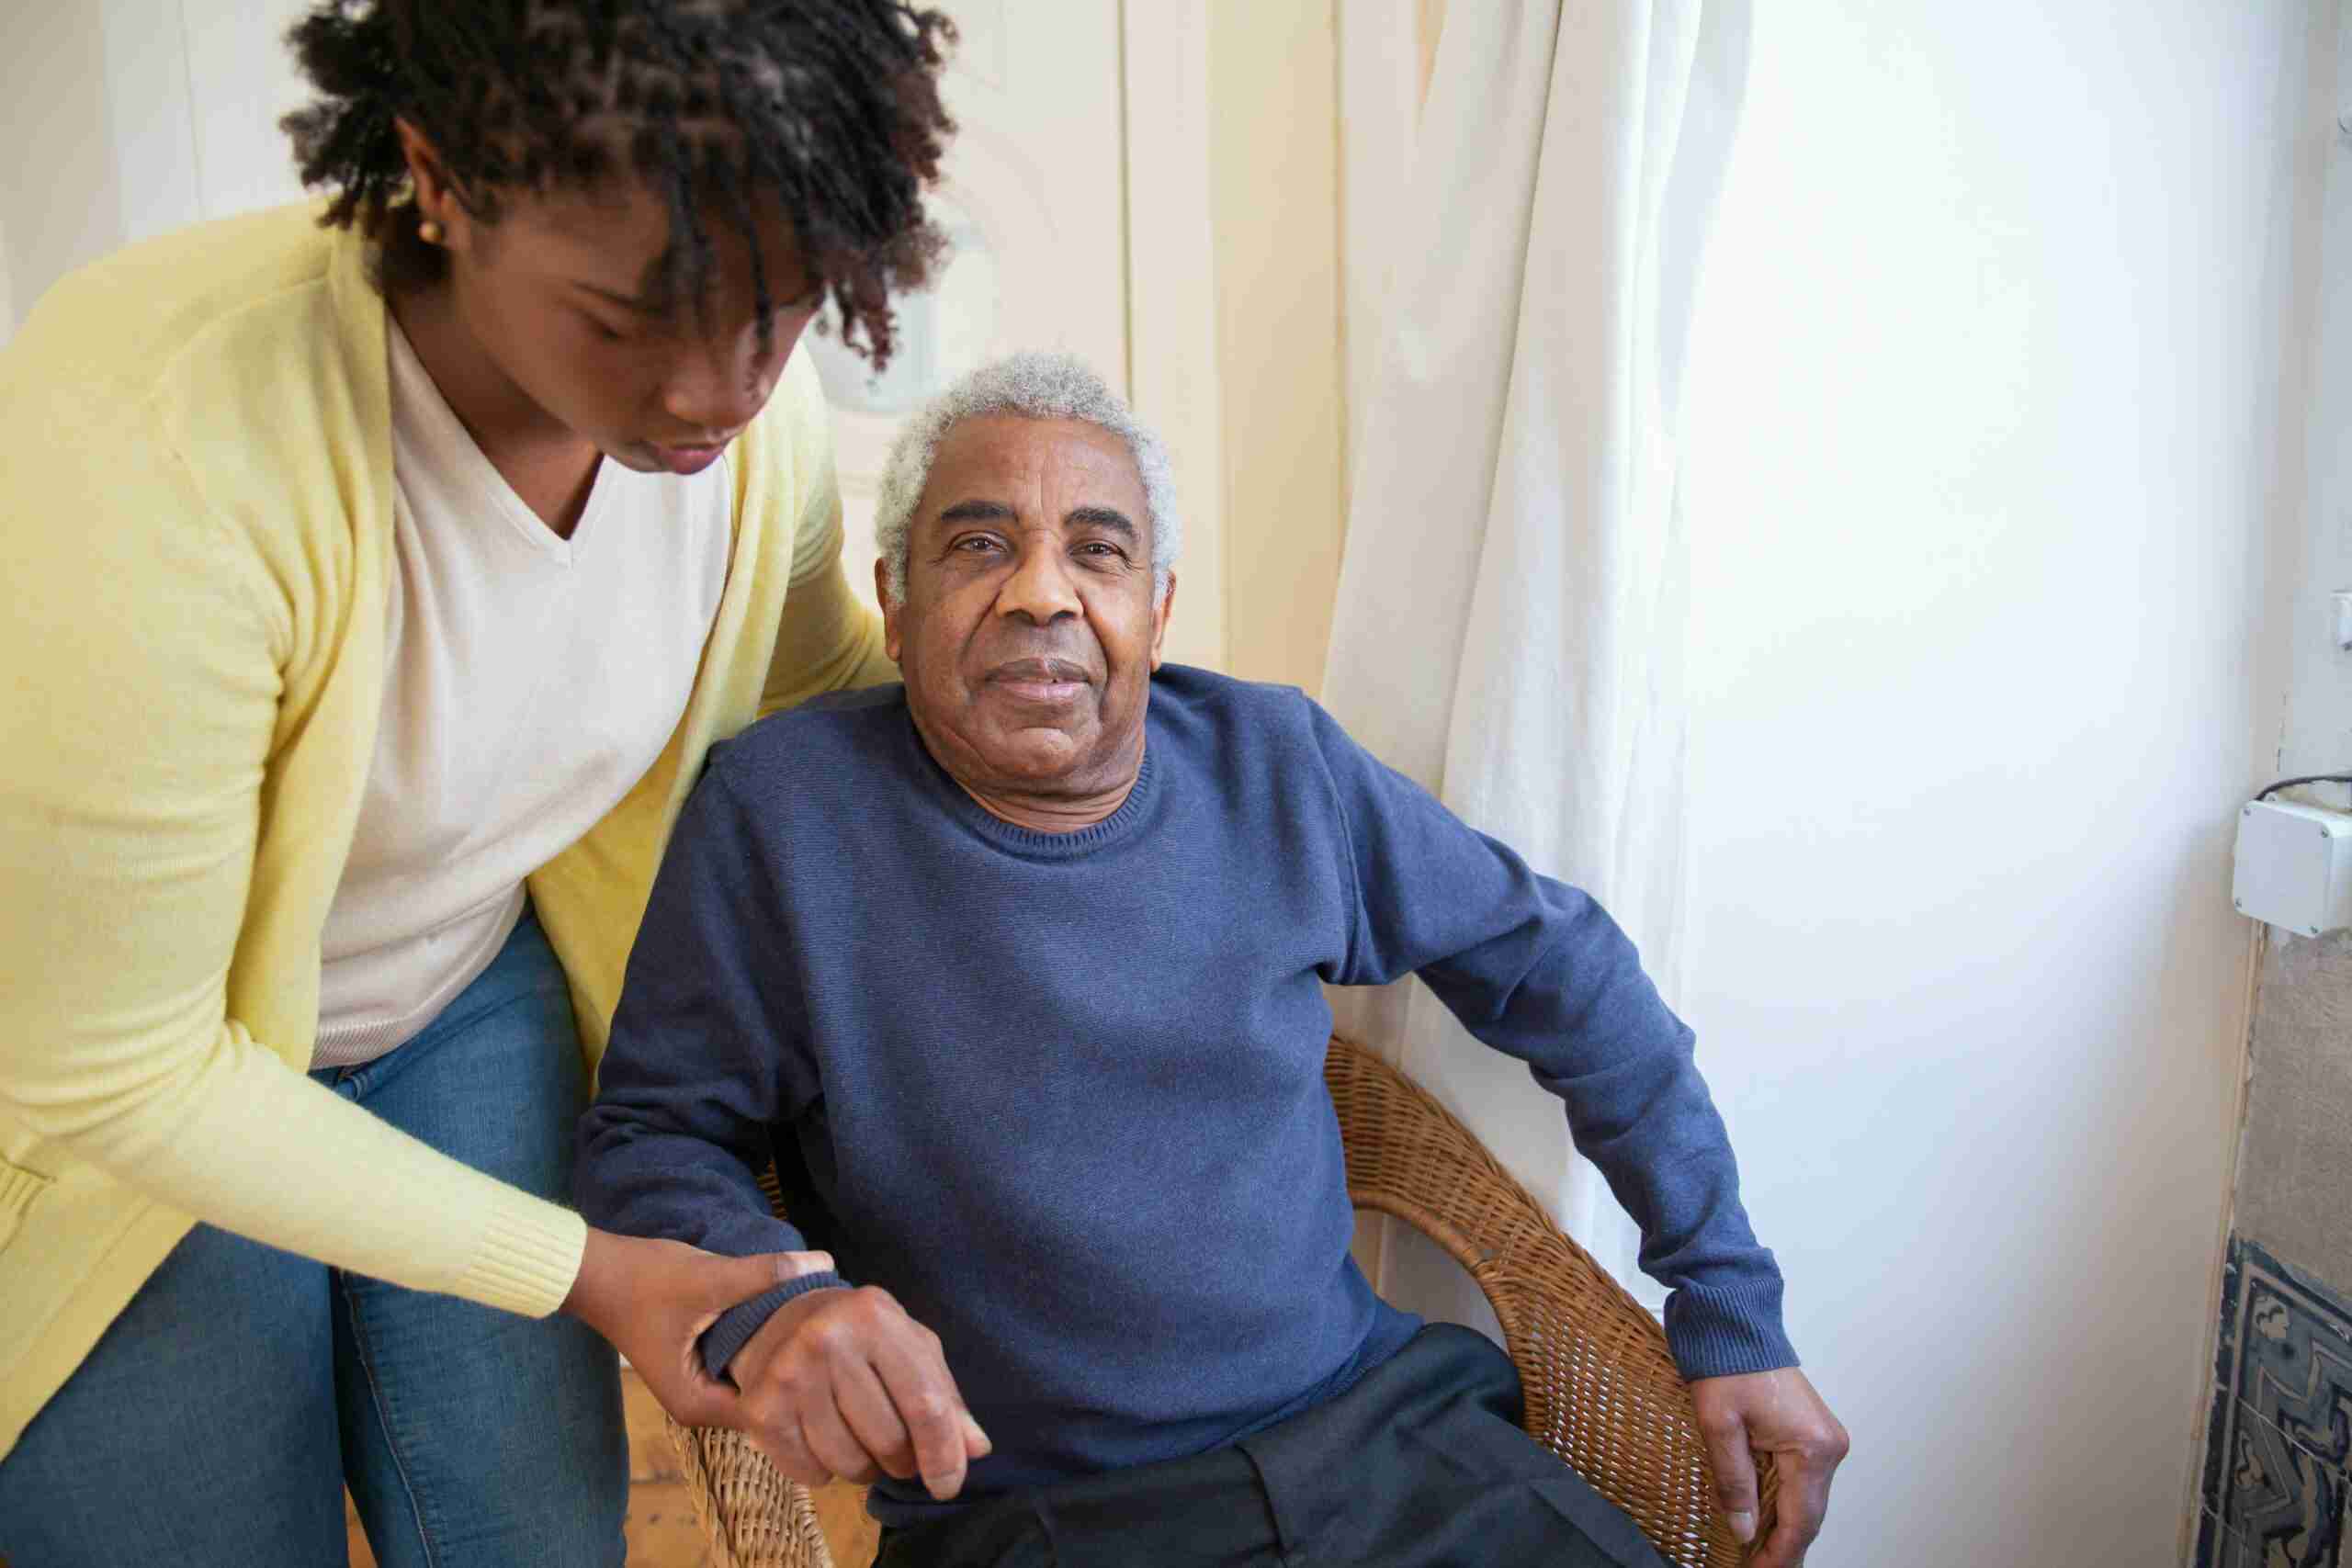 The different types of homecare